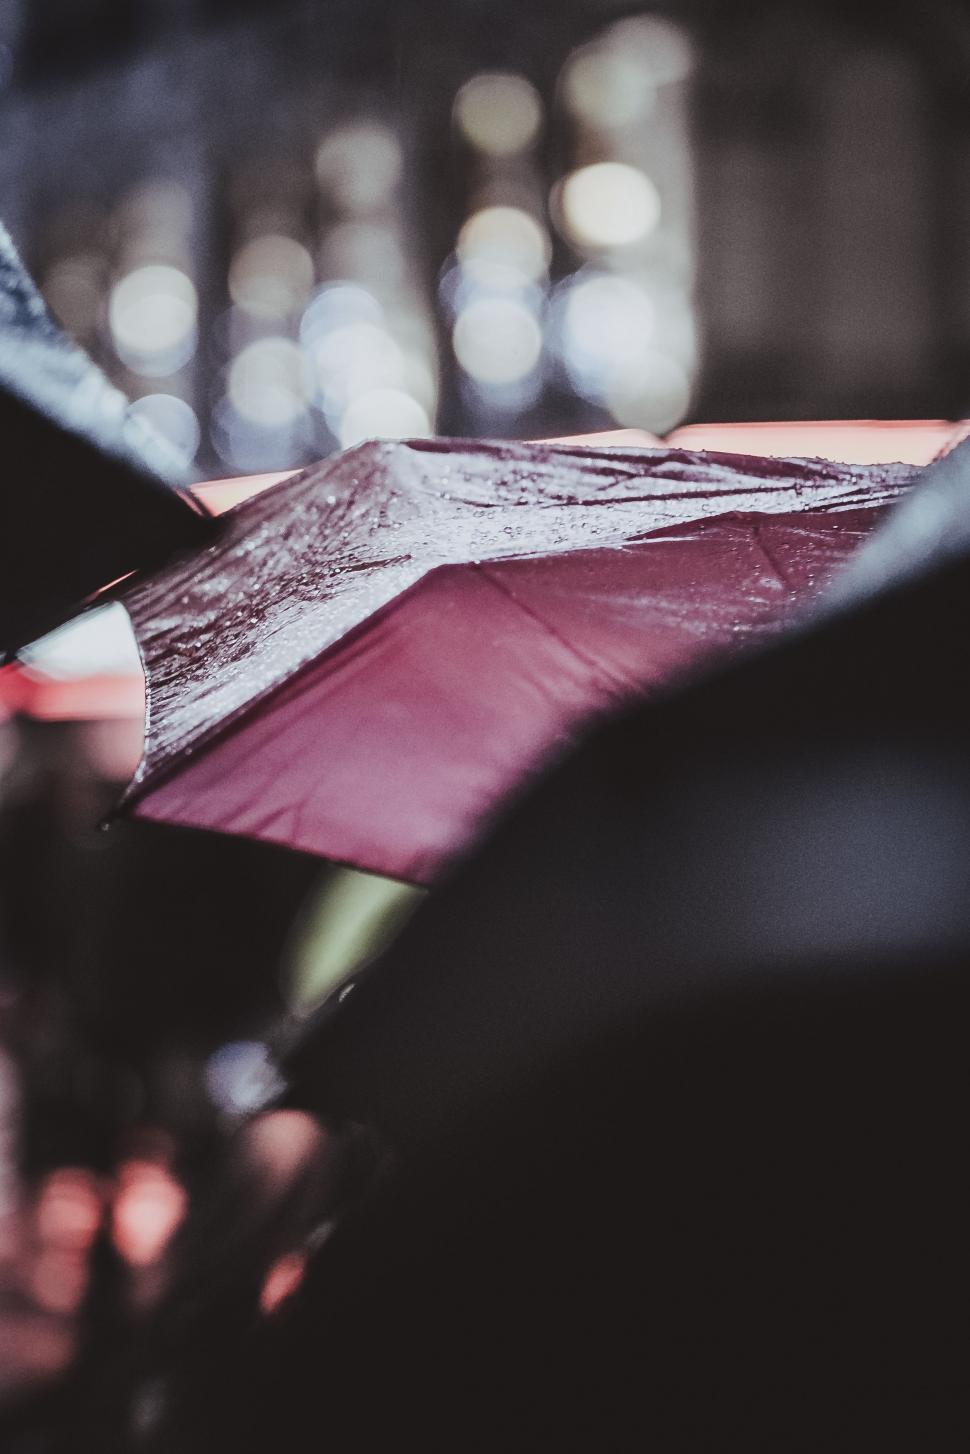 Free Image of People Holding Umbrellas in the Rain 